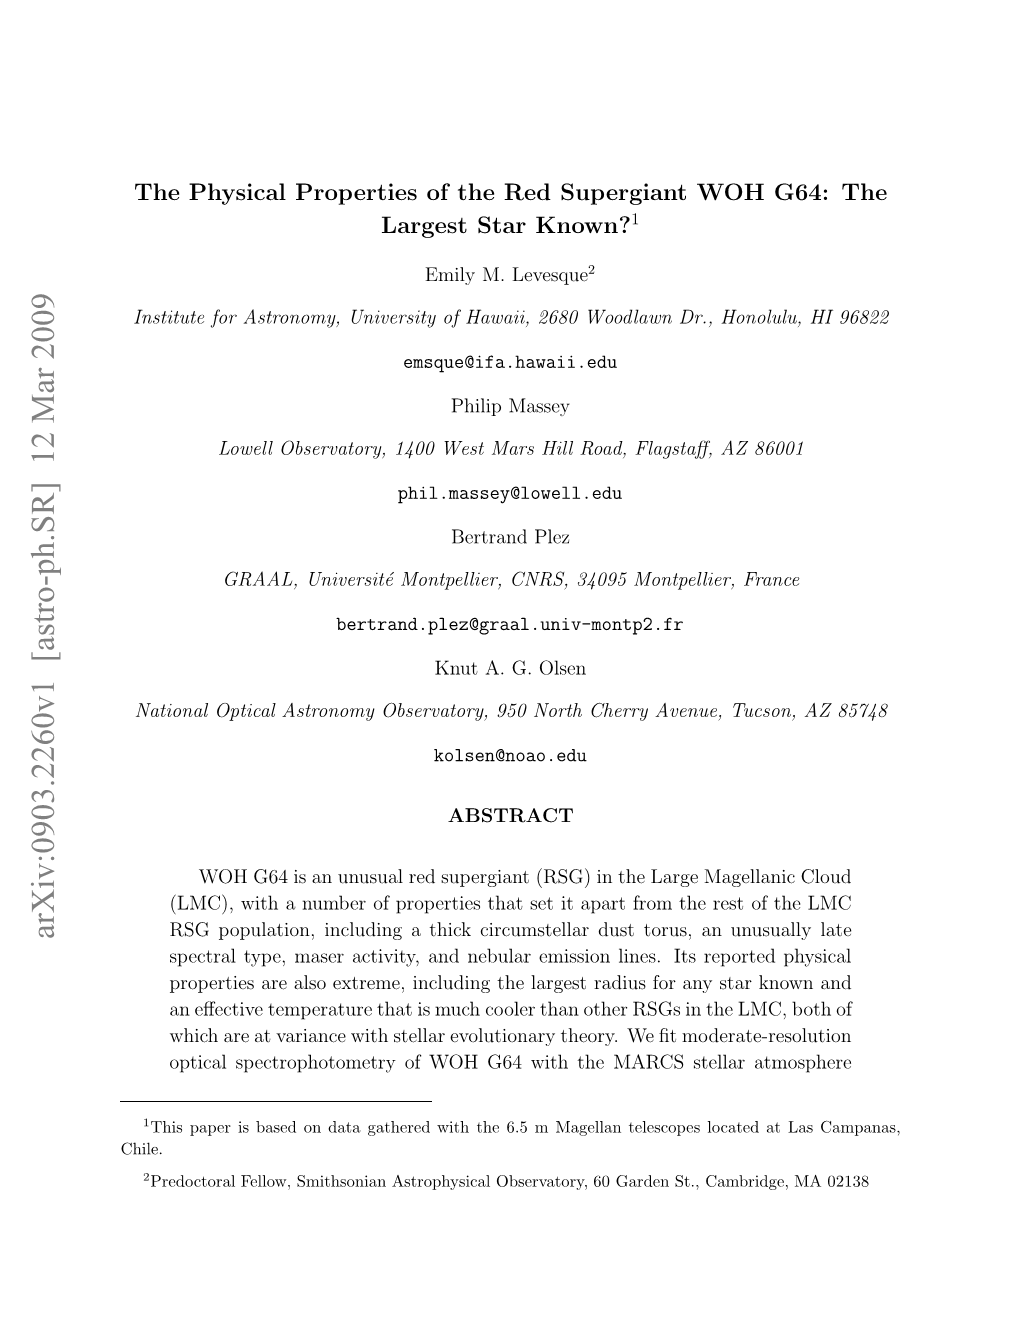 The Physical Properties of the Red Supergiant WOH G64: the Largest